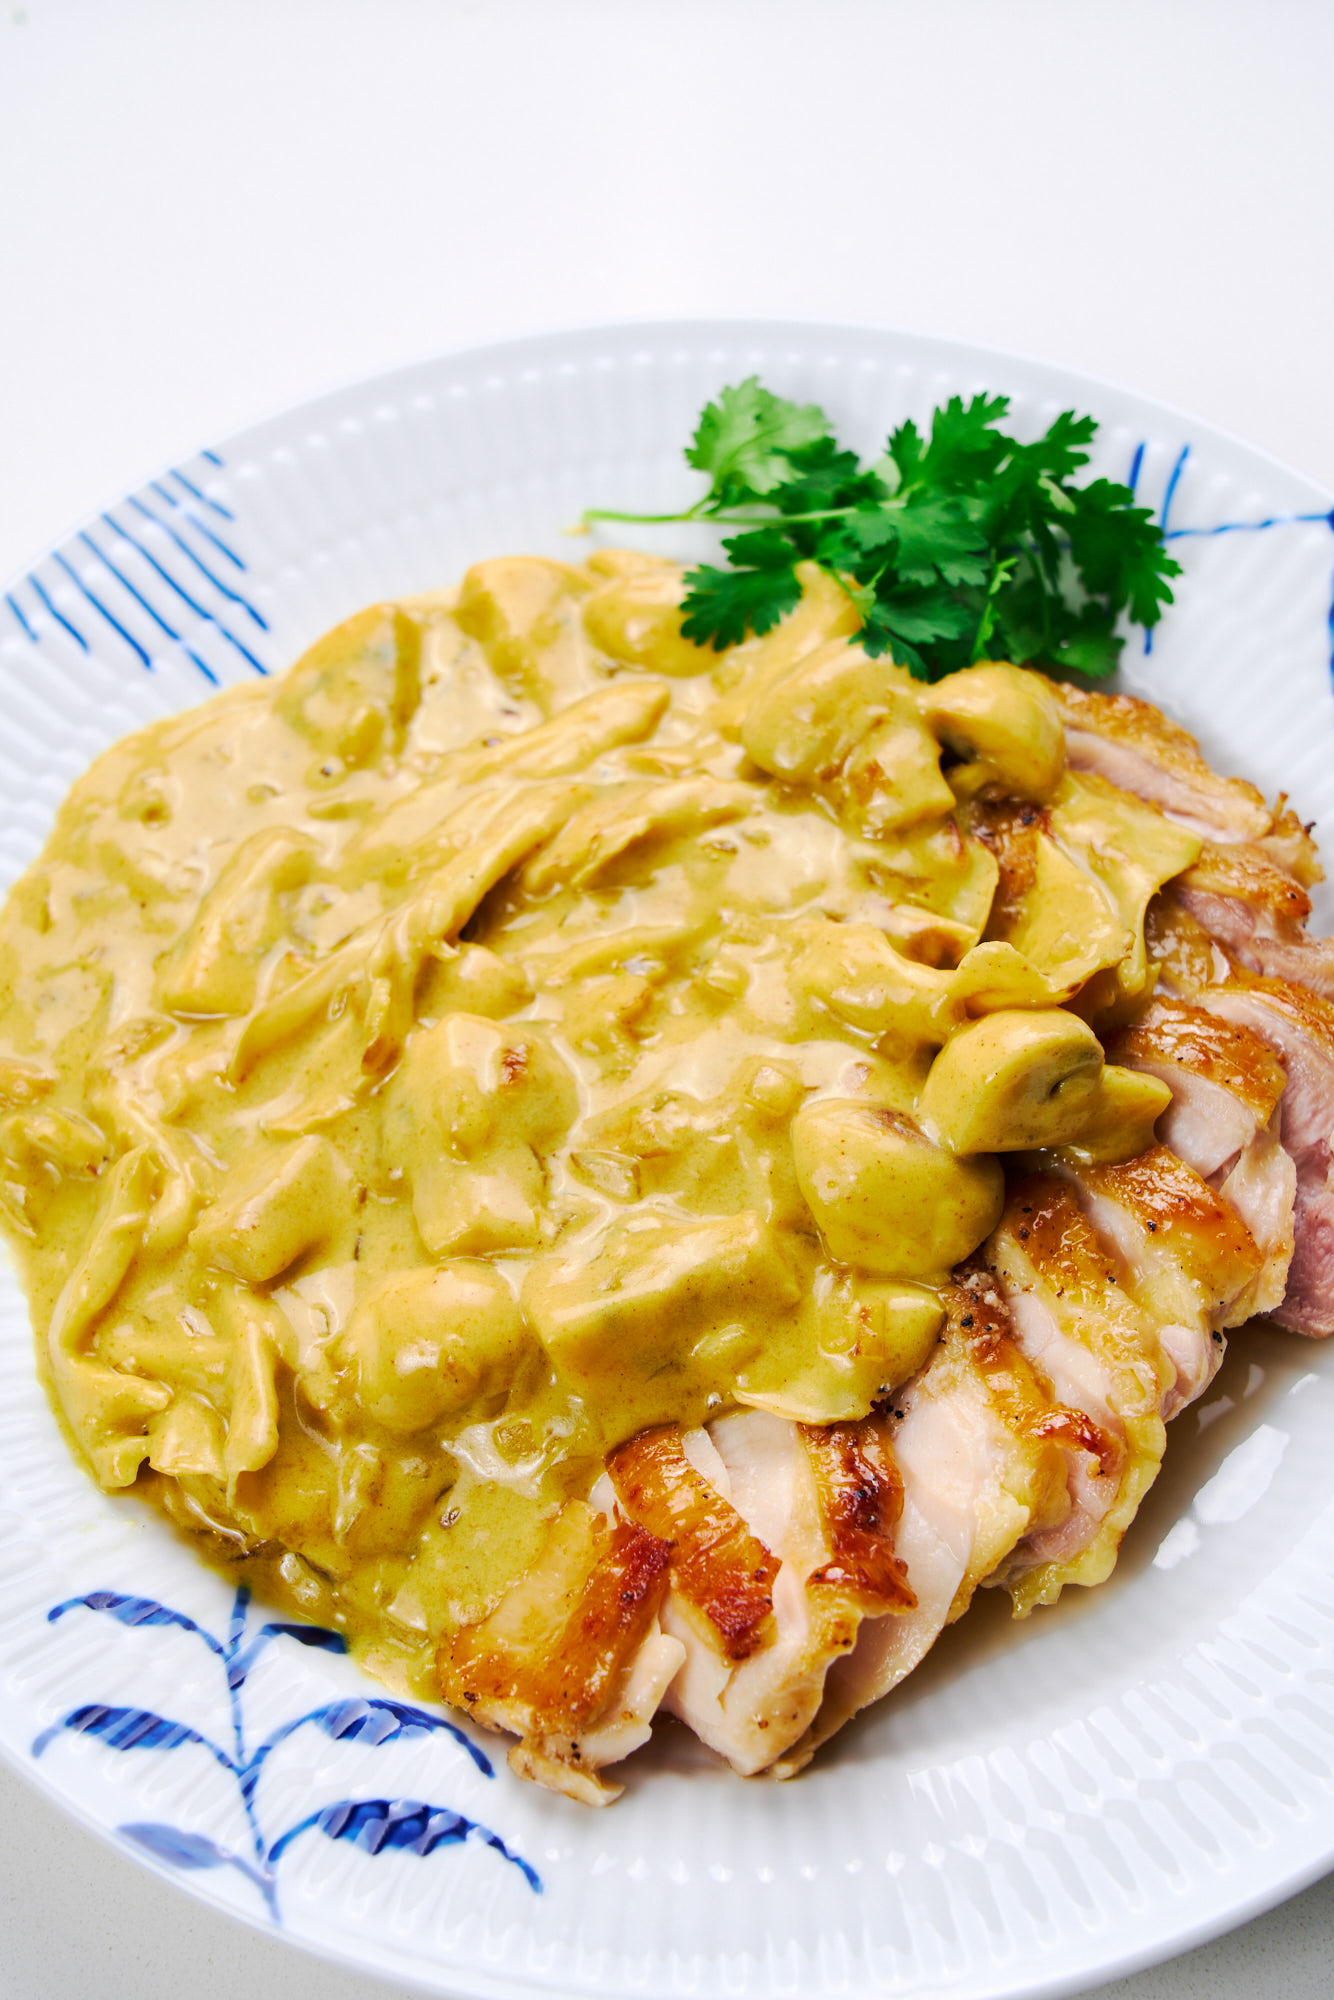 Chicken Steak with Creamy Mushrooms Sauce on a plate.